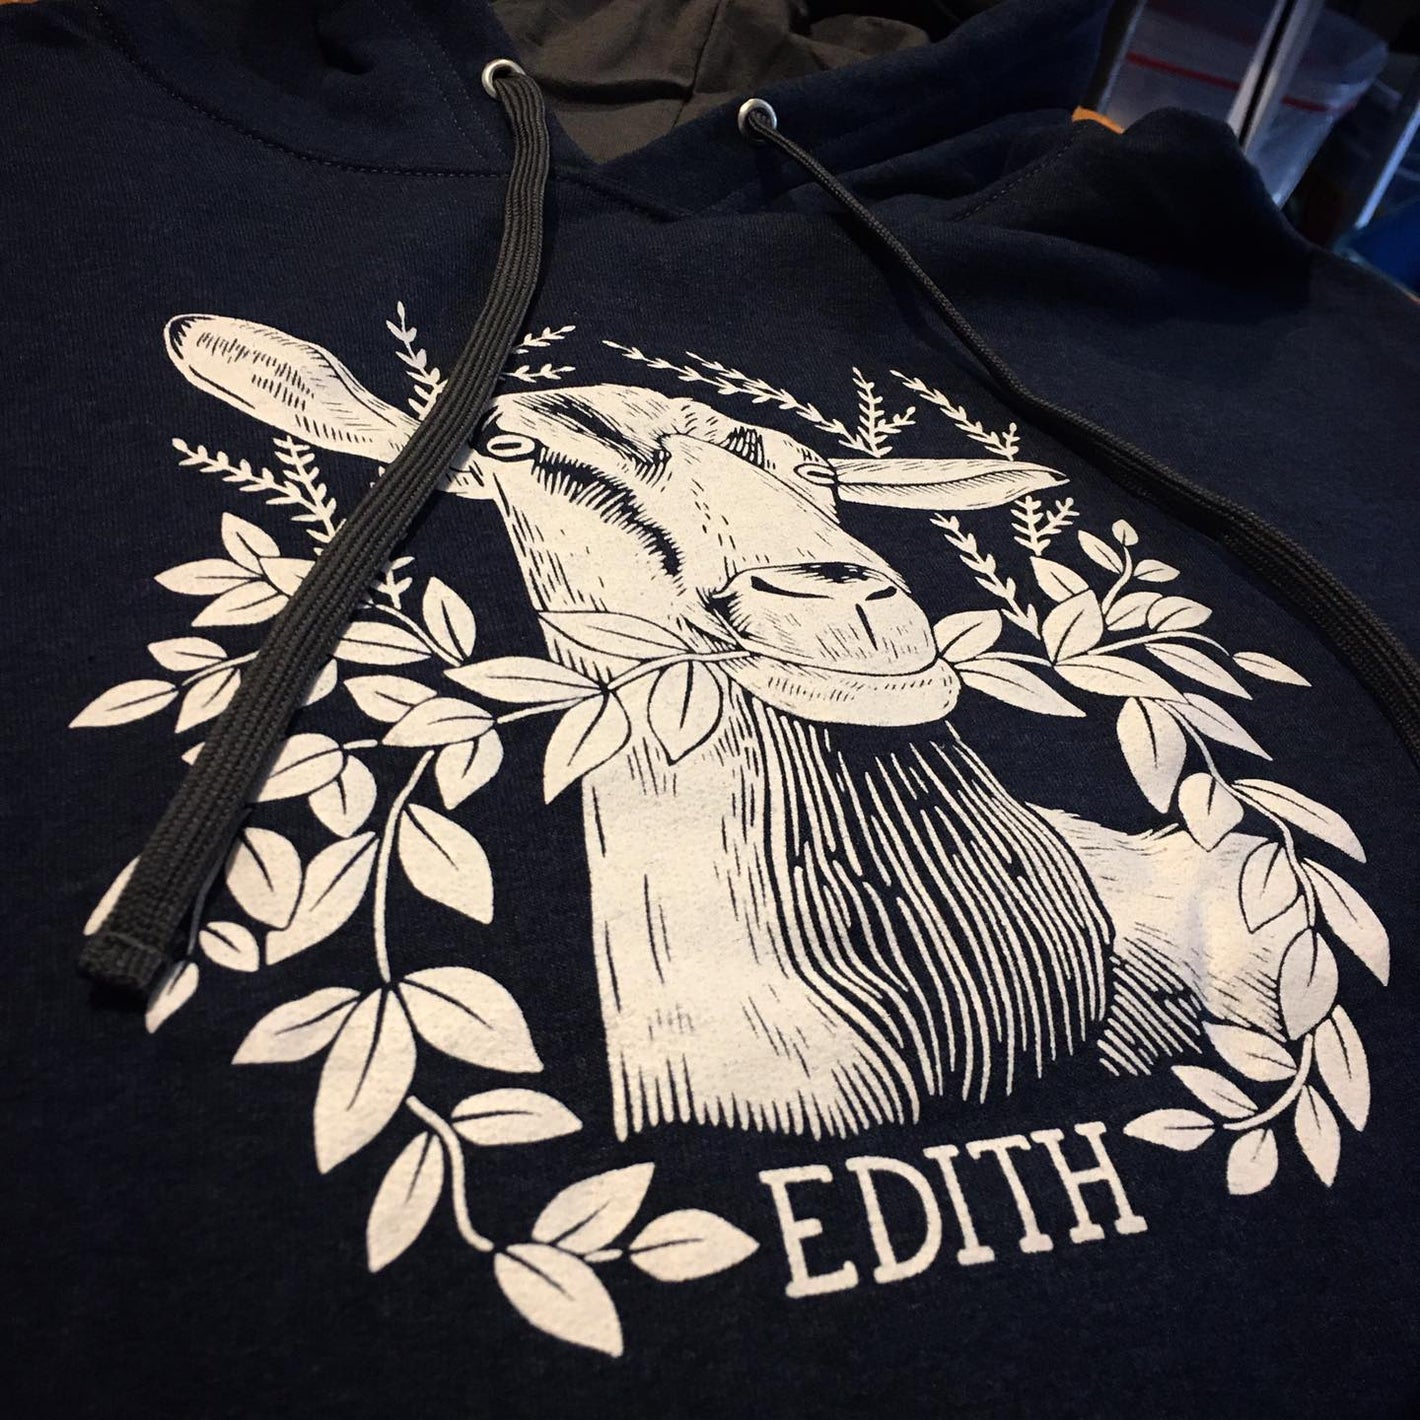 Custom screen printed sweatshirt features goat Edith for Georges Mill Farm and Artisan Cheese.